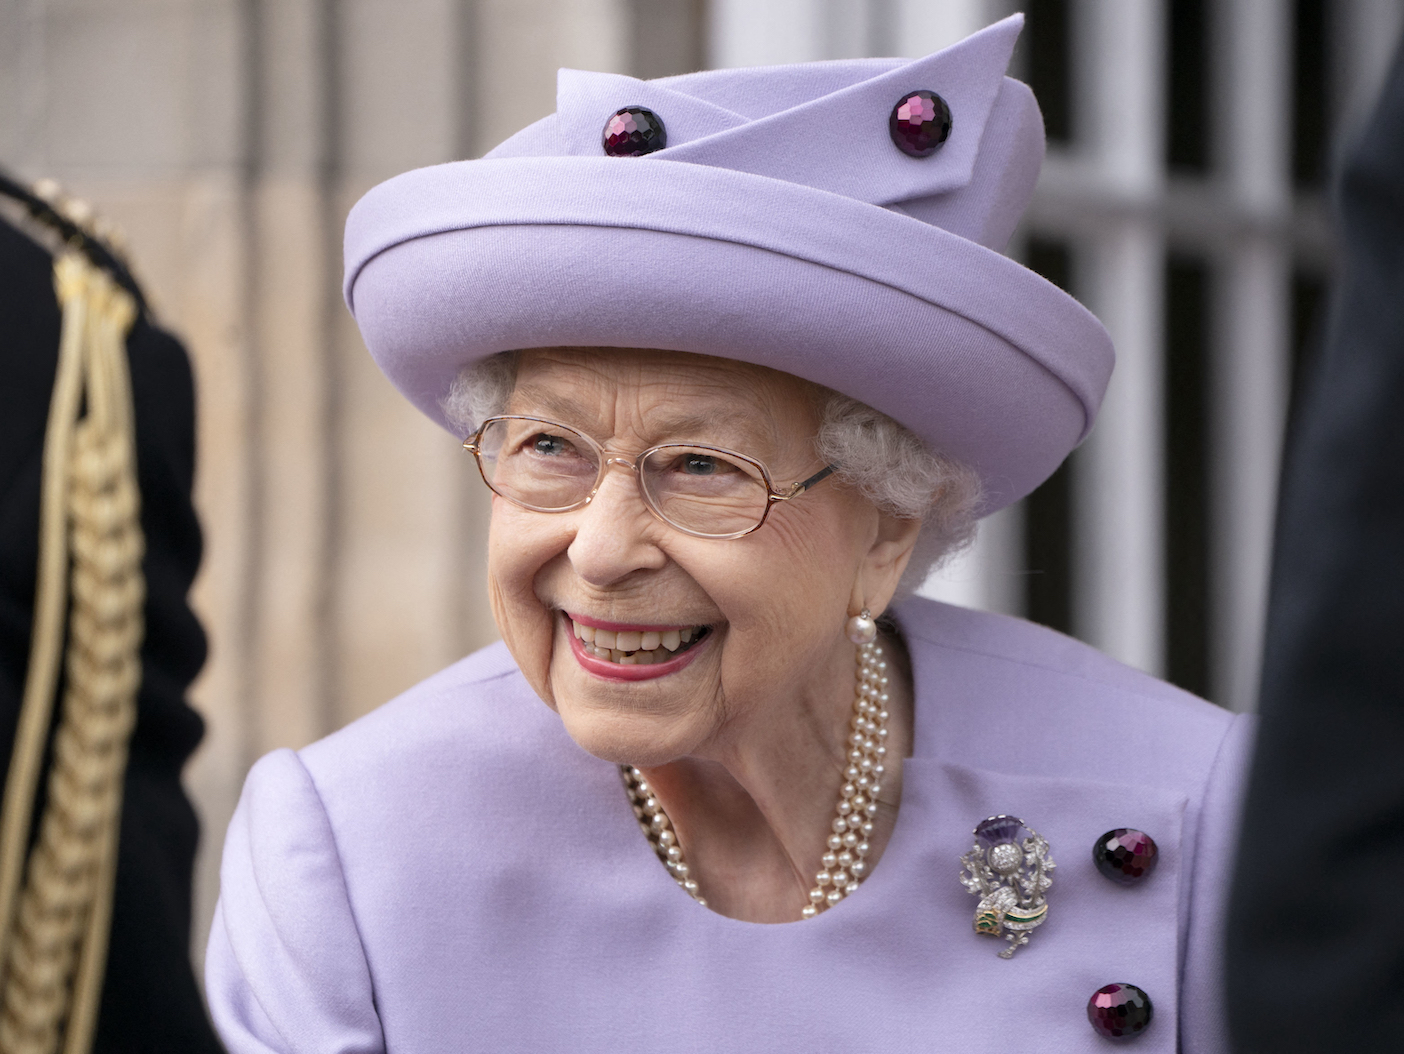 closeup photo of Queen Elizabeth smiling in a purple outfit and hat